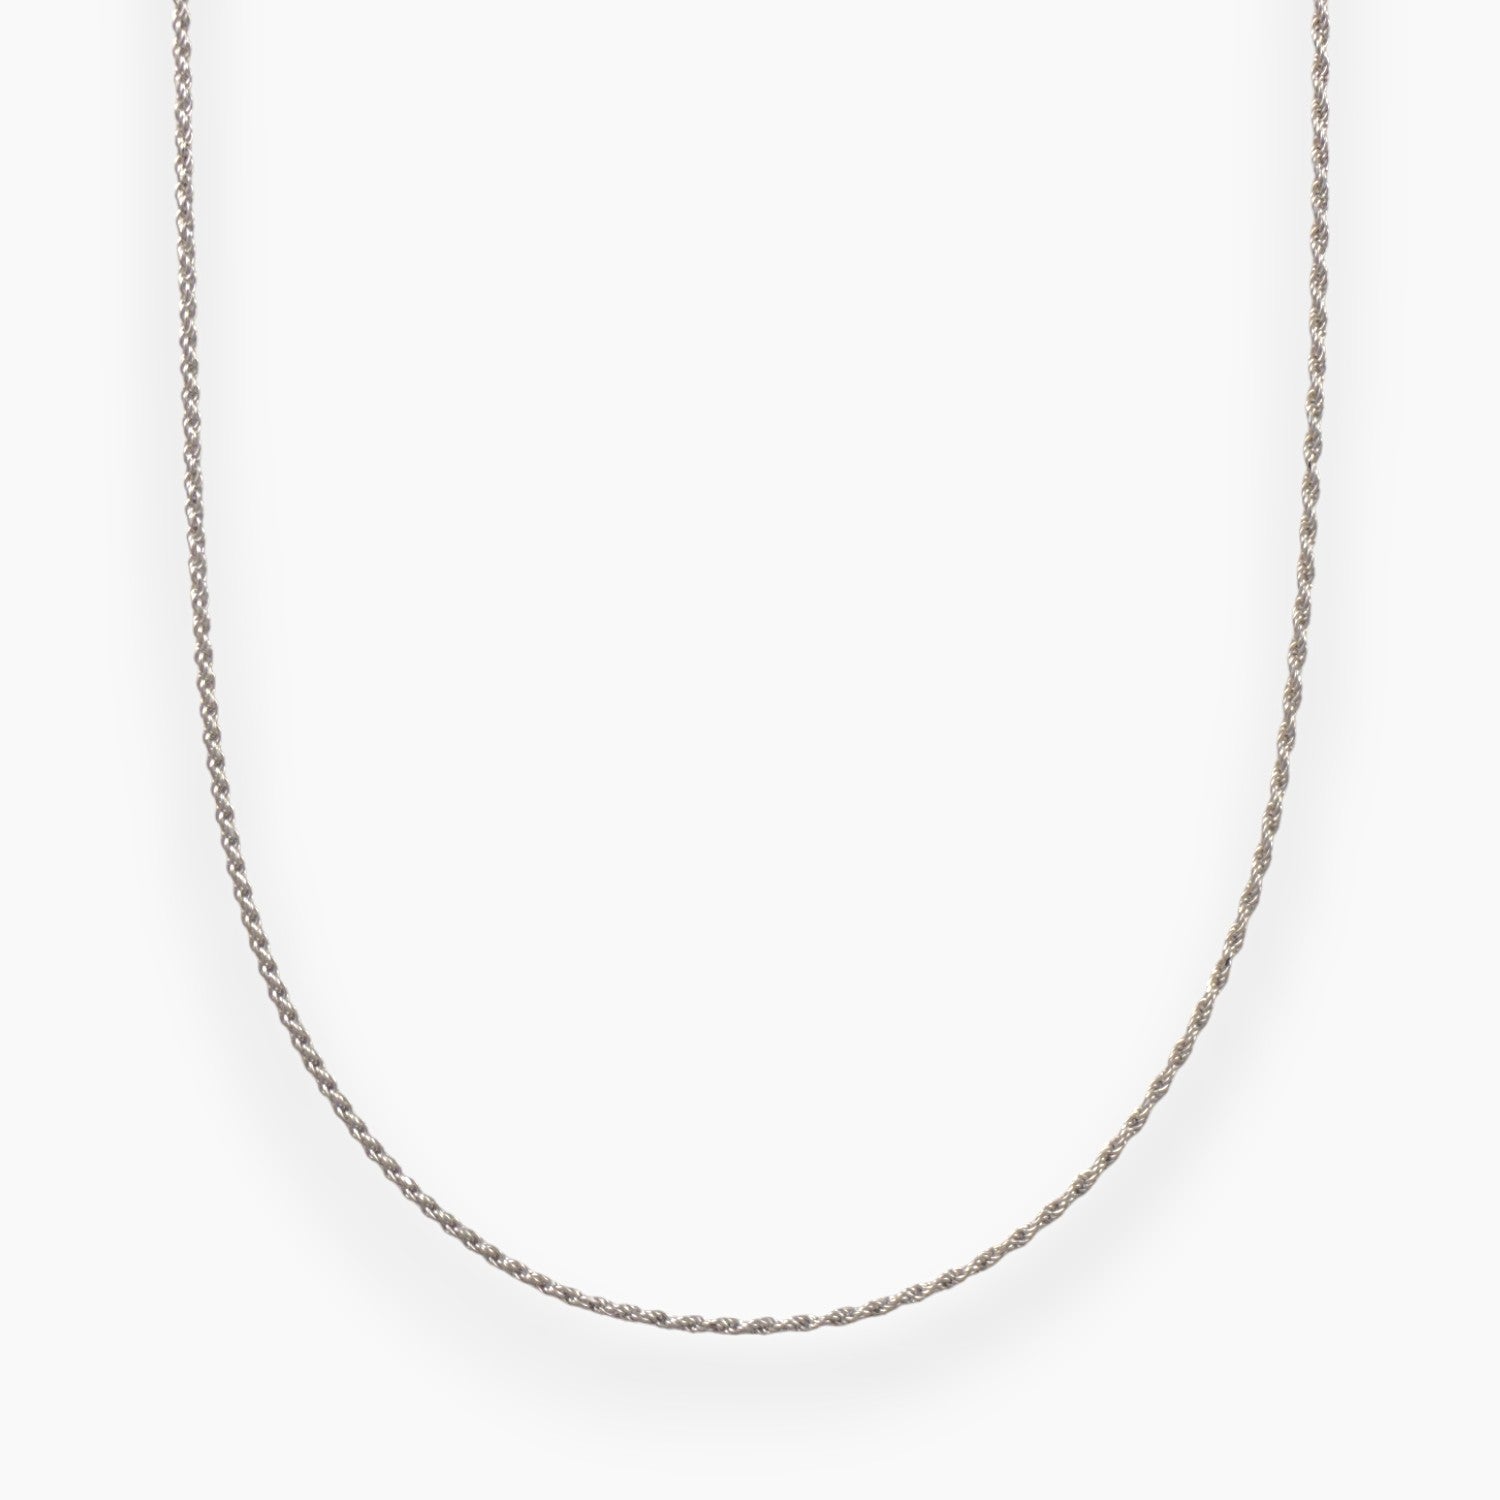 1.5mm italy 925 sterling silver rope chain (diamond cut)